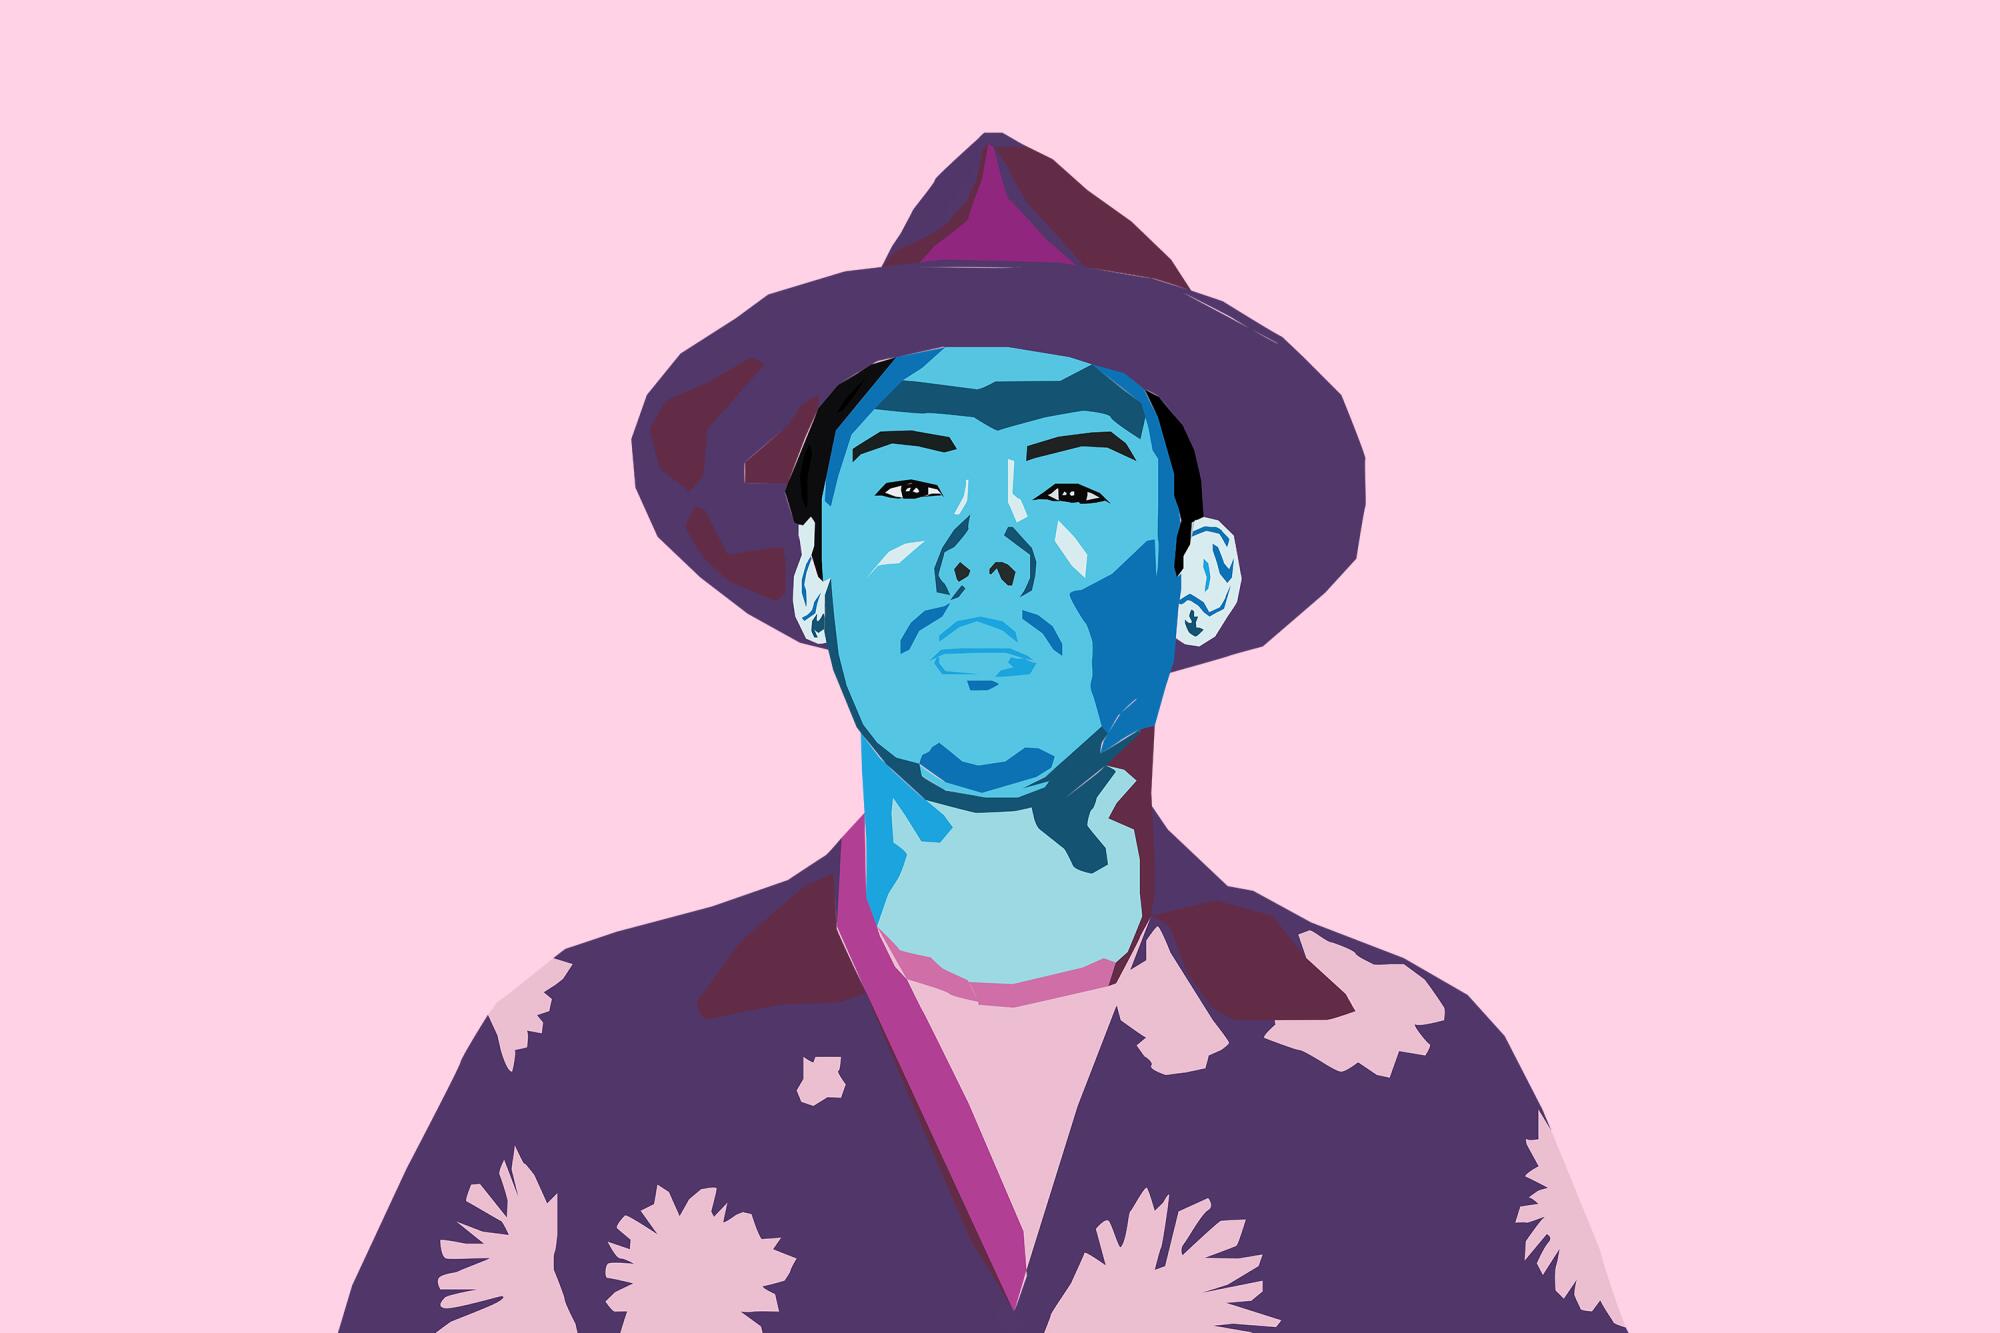 A pink, blue, and purple illustration of Dr. Woo wearing a hat and patterned shirt.